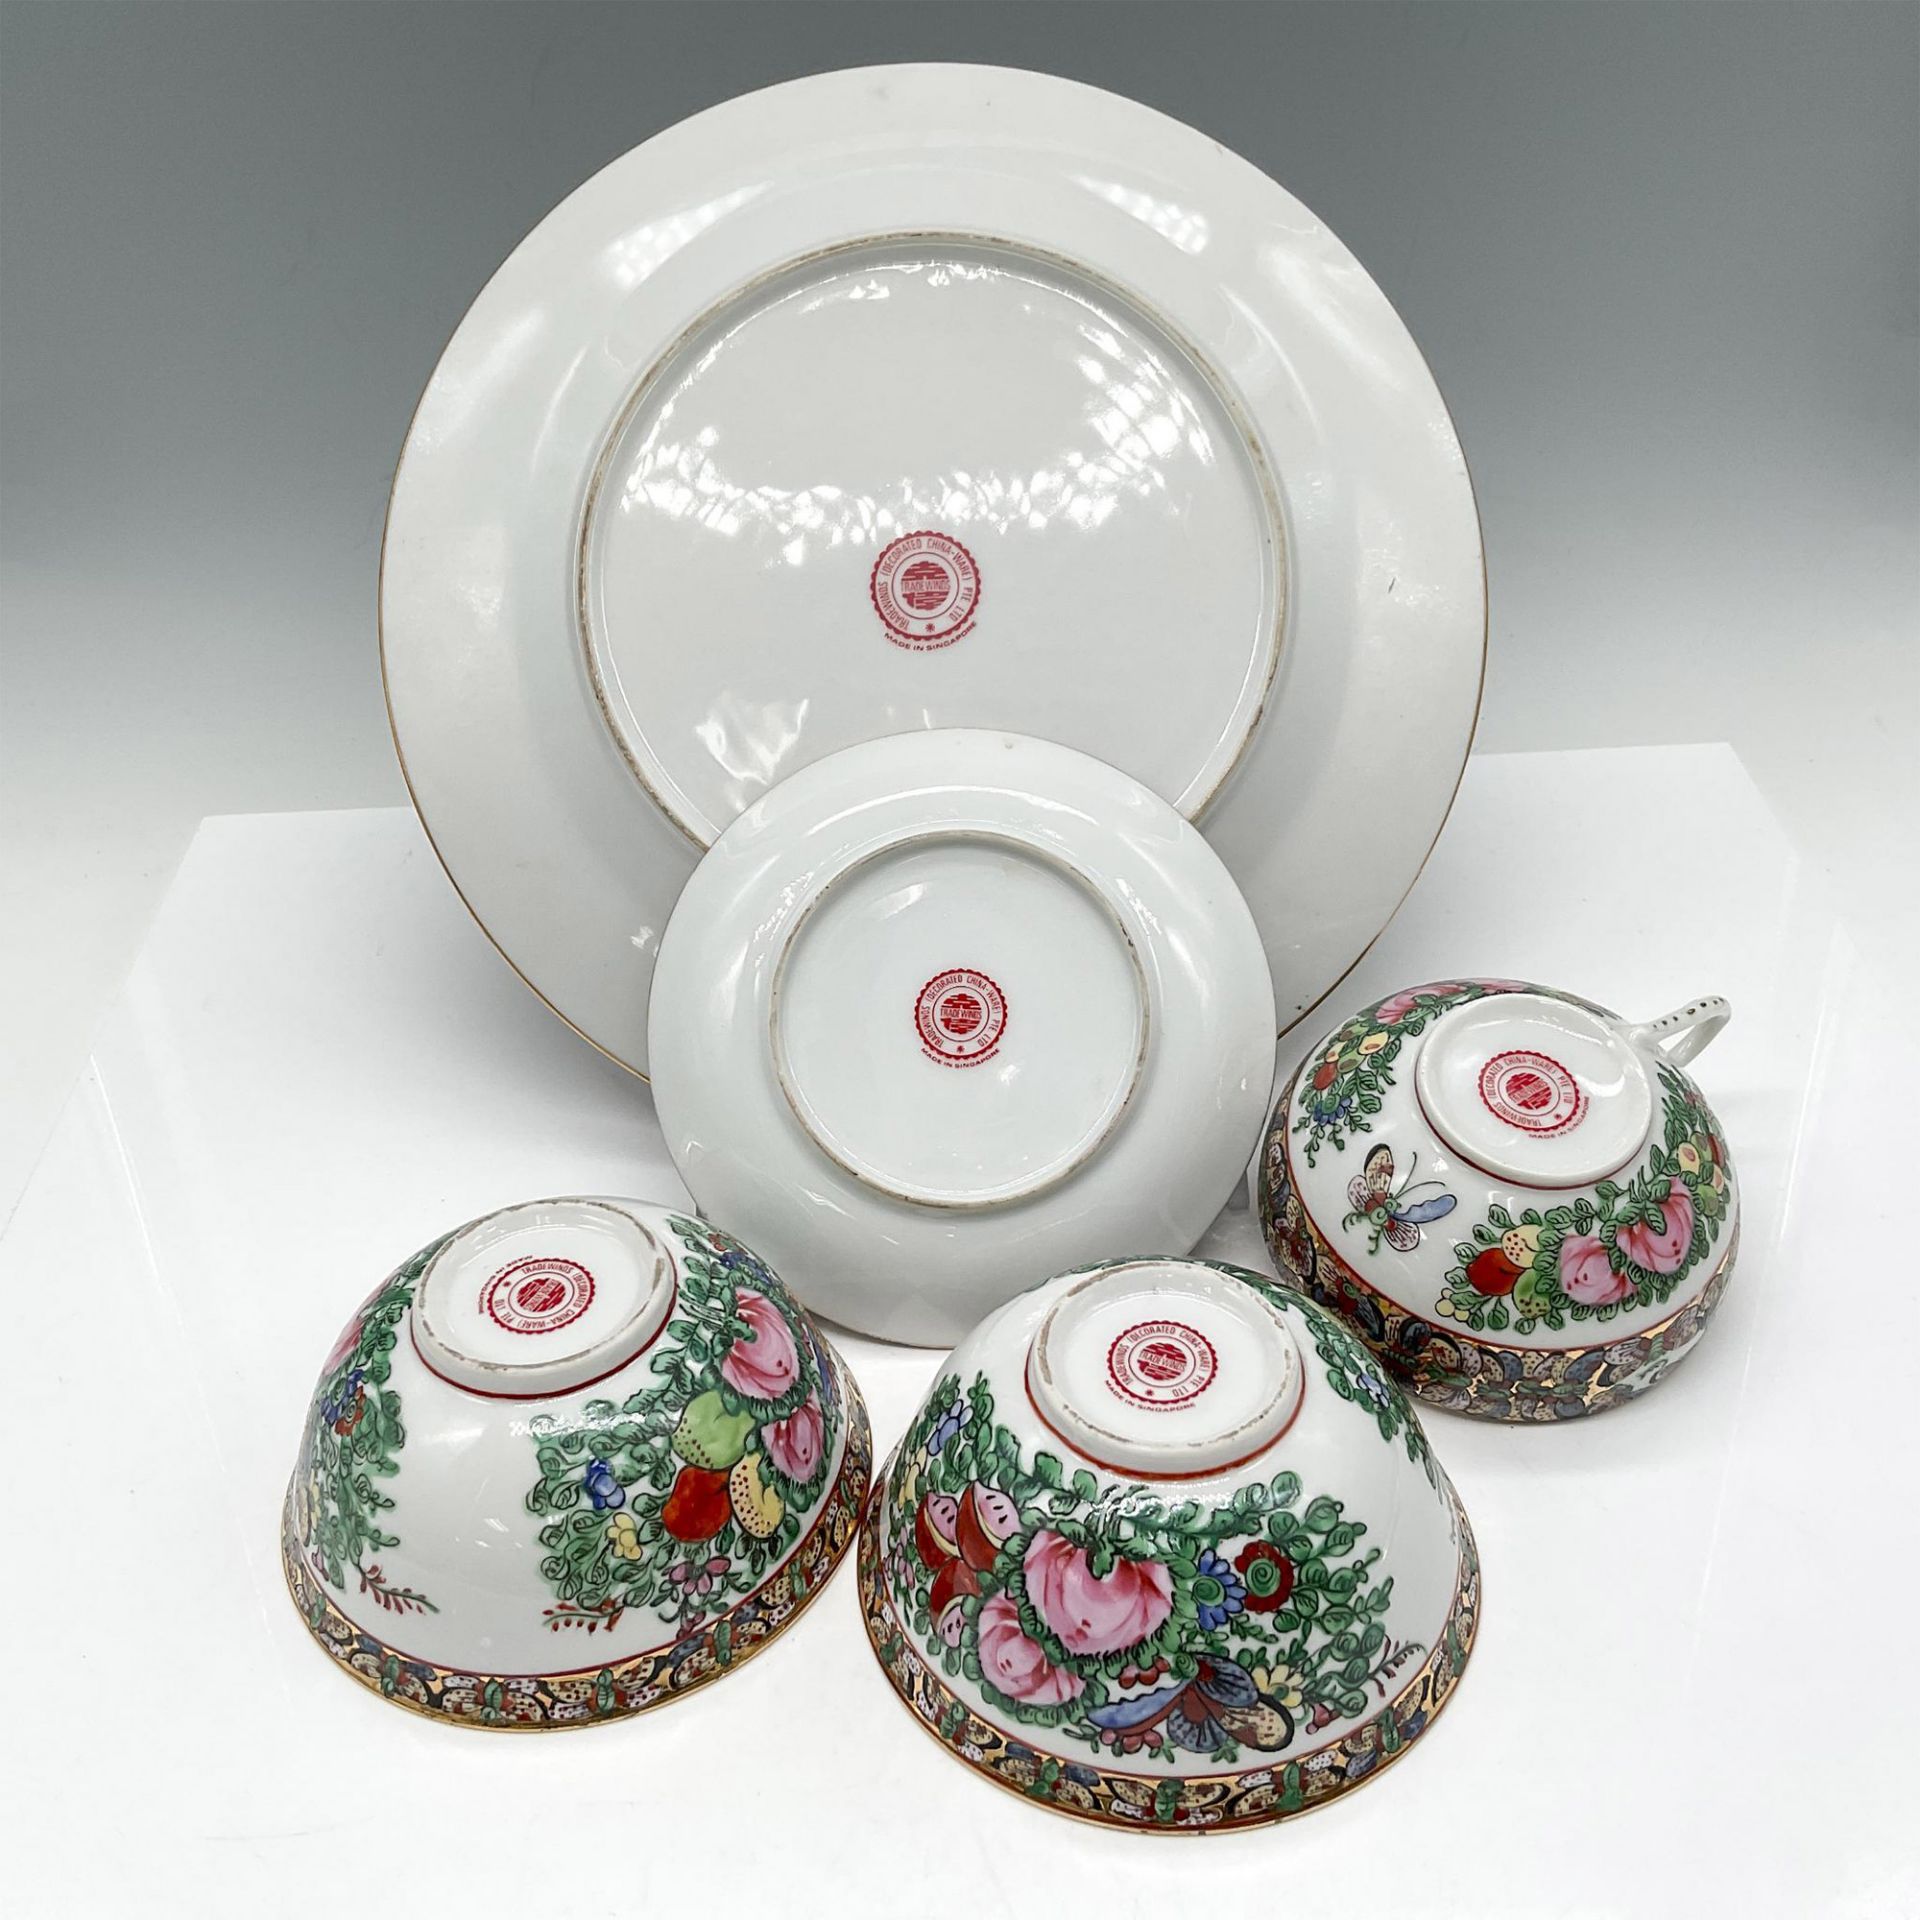 6pc Tradewinds Porcelain Ware, Thousand Butterfly's - Image 3 of 3